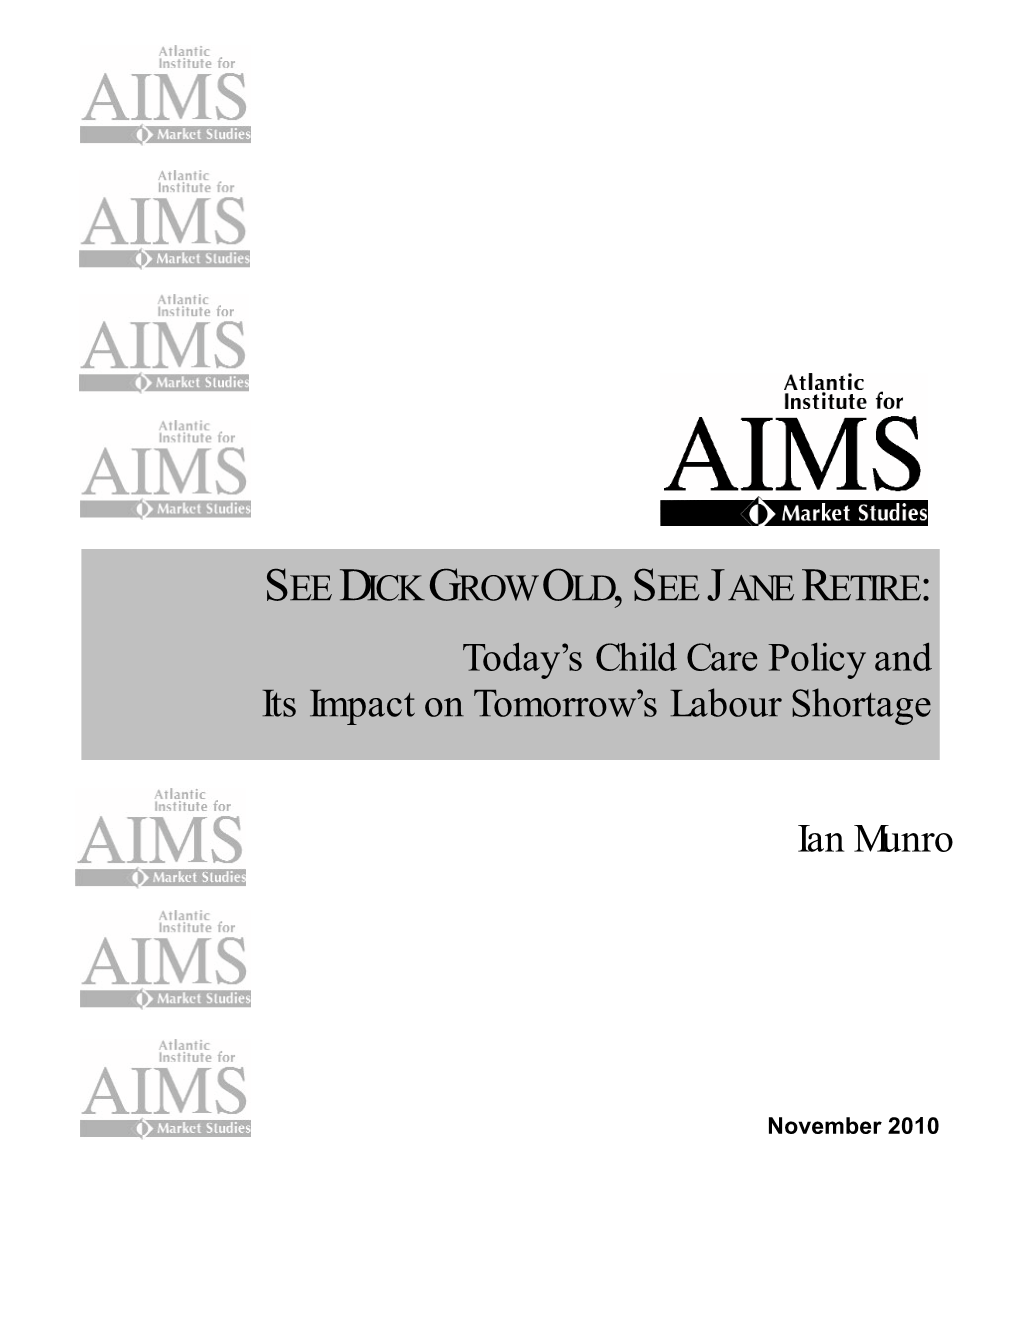 Today's Child Care Policy and Its Impact on Tomorrow's